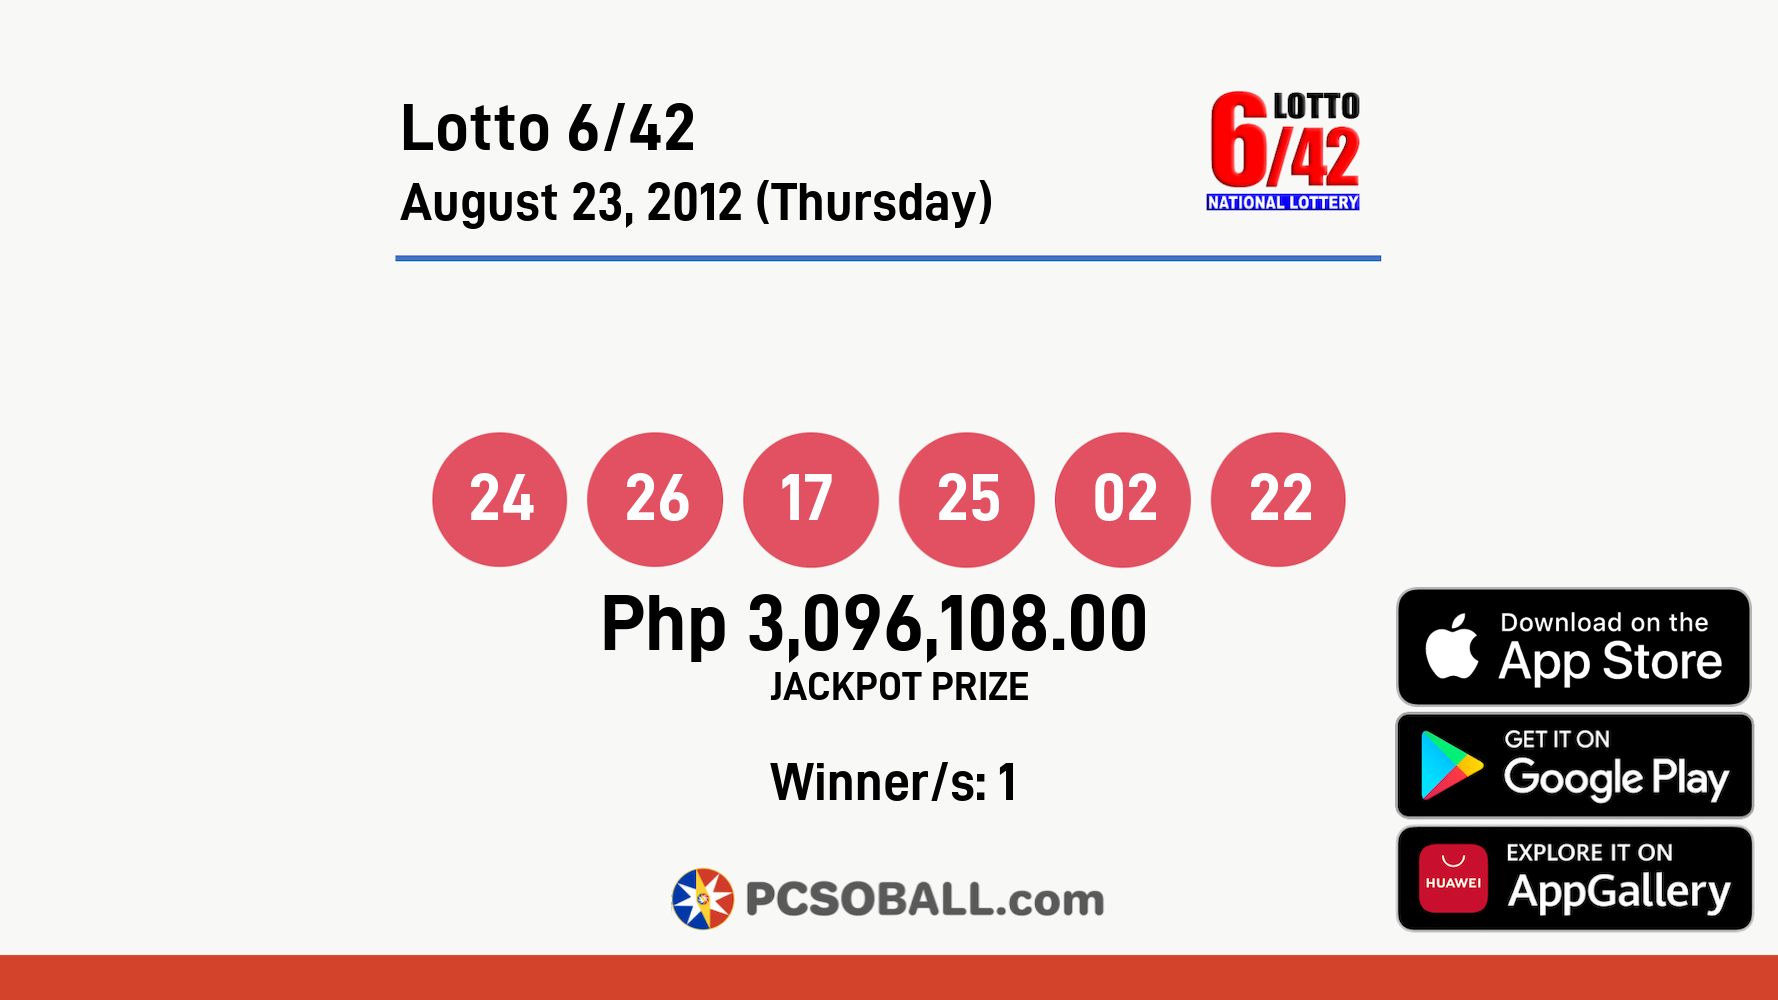 Lotto 6/42 August 23, 2012 (Thursday) Result